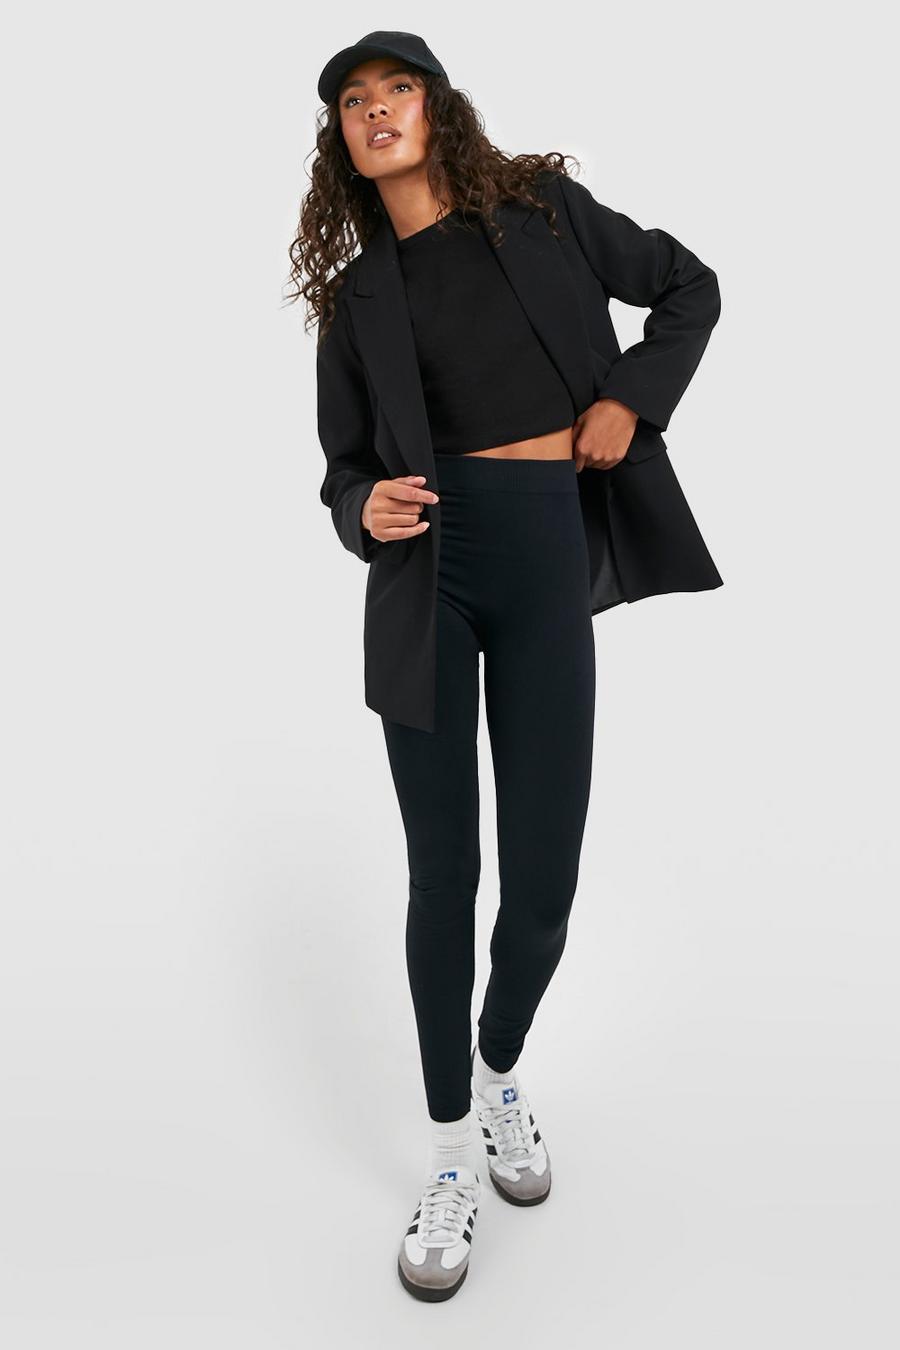 SHEIN Tall Fleece Lined Thermal Leggings With V-Shaped Cross